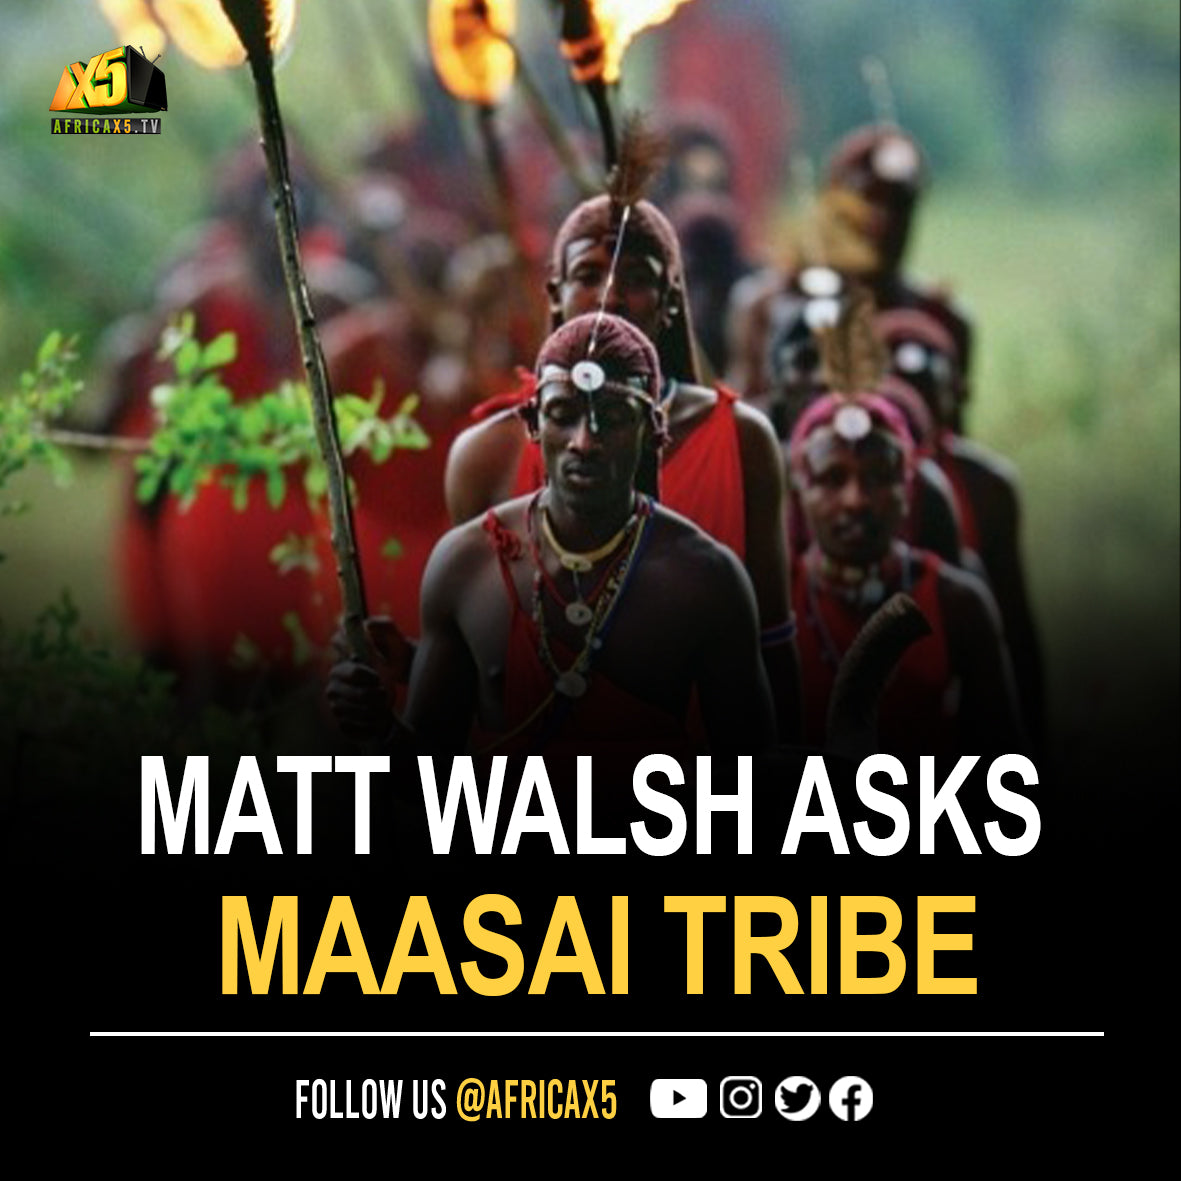 Matt Walsh Asks Maasai Tribe “What is a Woman?”Matt travels to Africa to ask local villagers about transgenderism and if their notions of gender are as fluid as in the West.